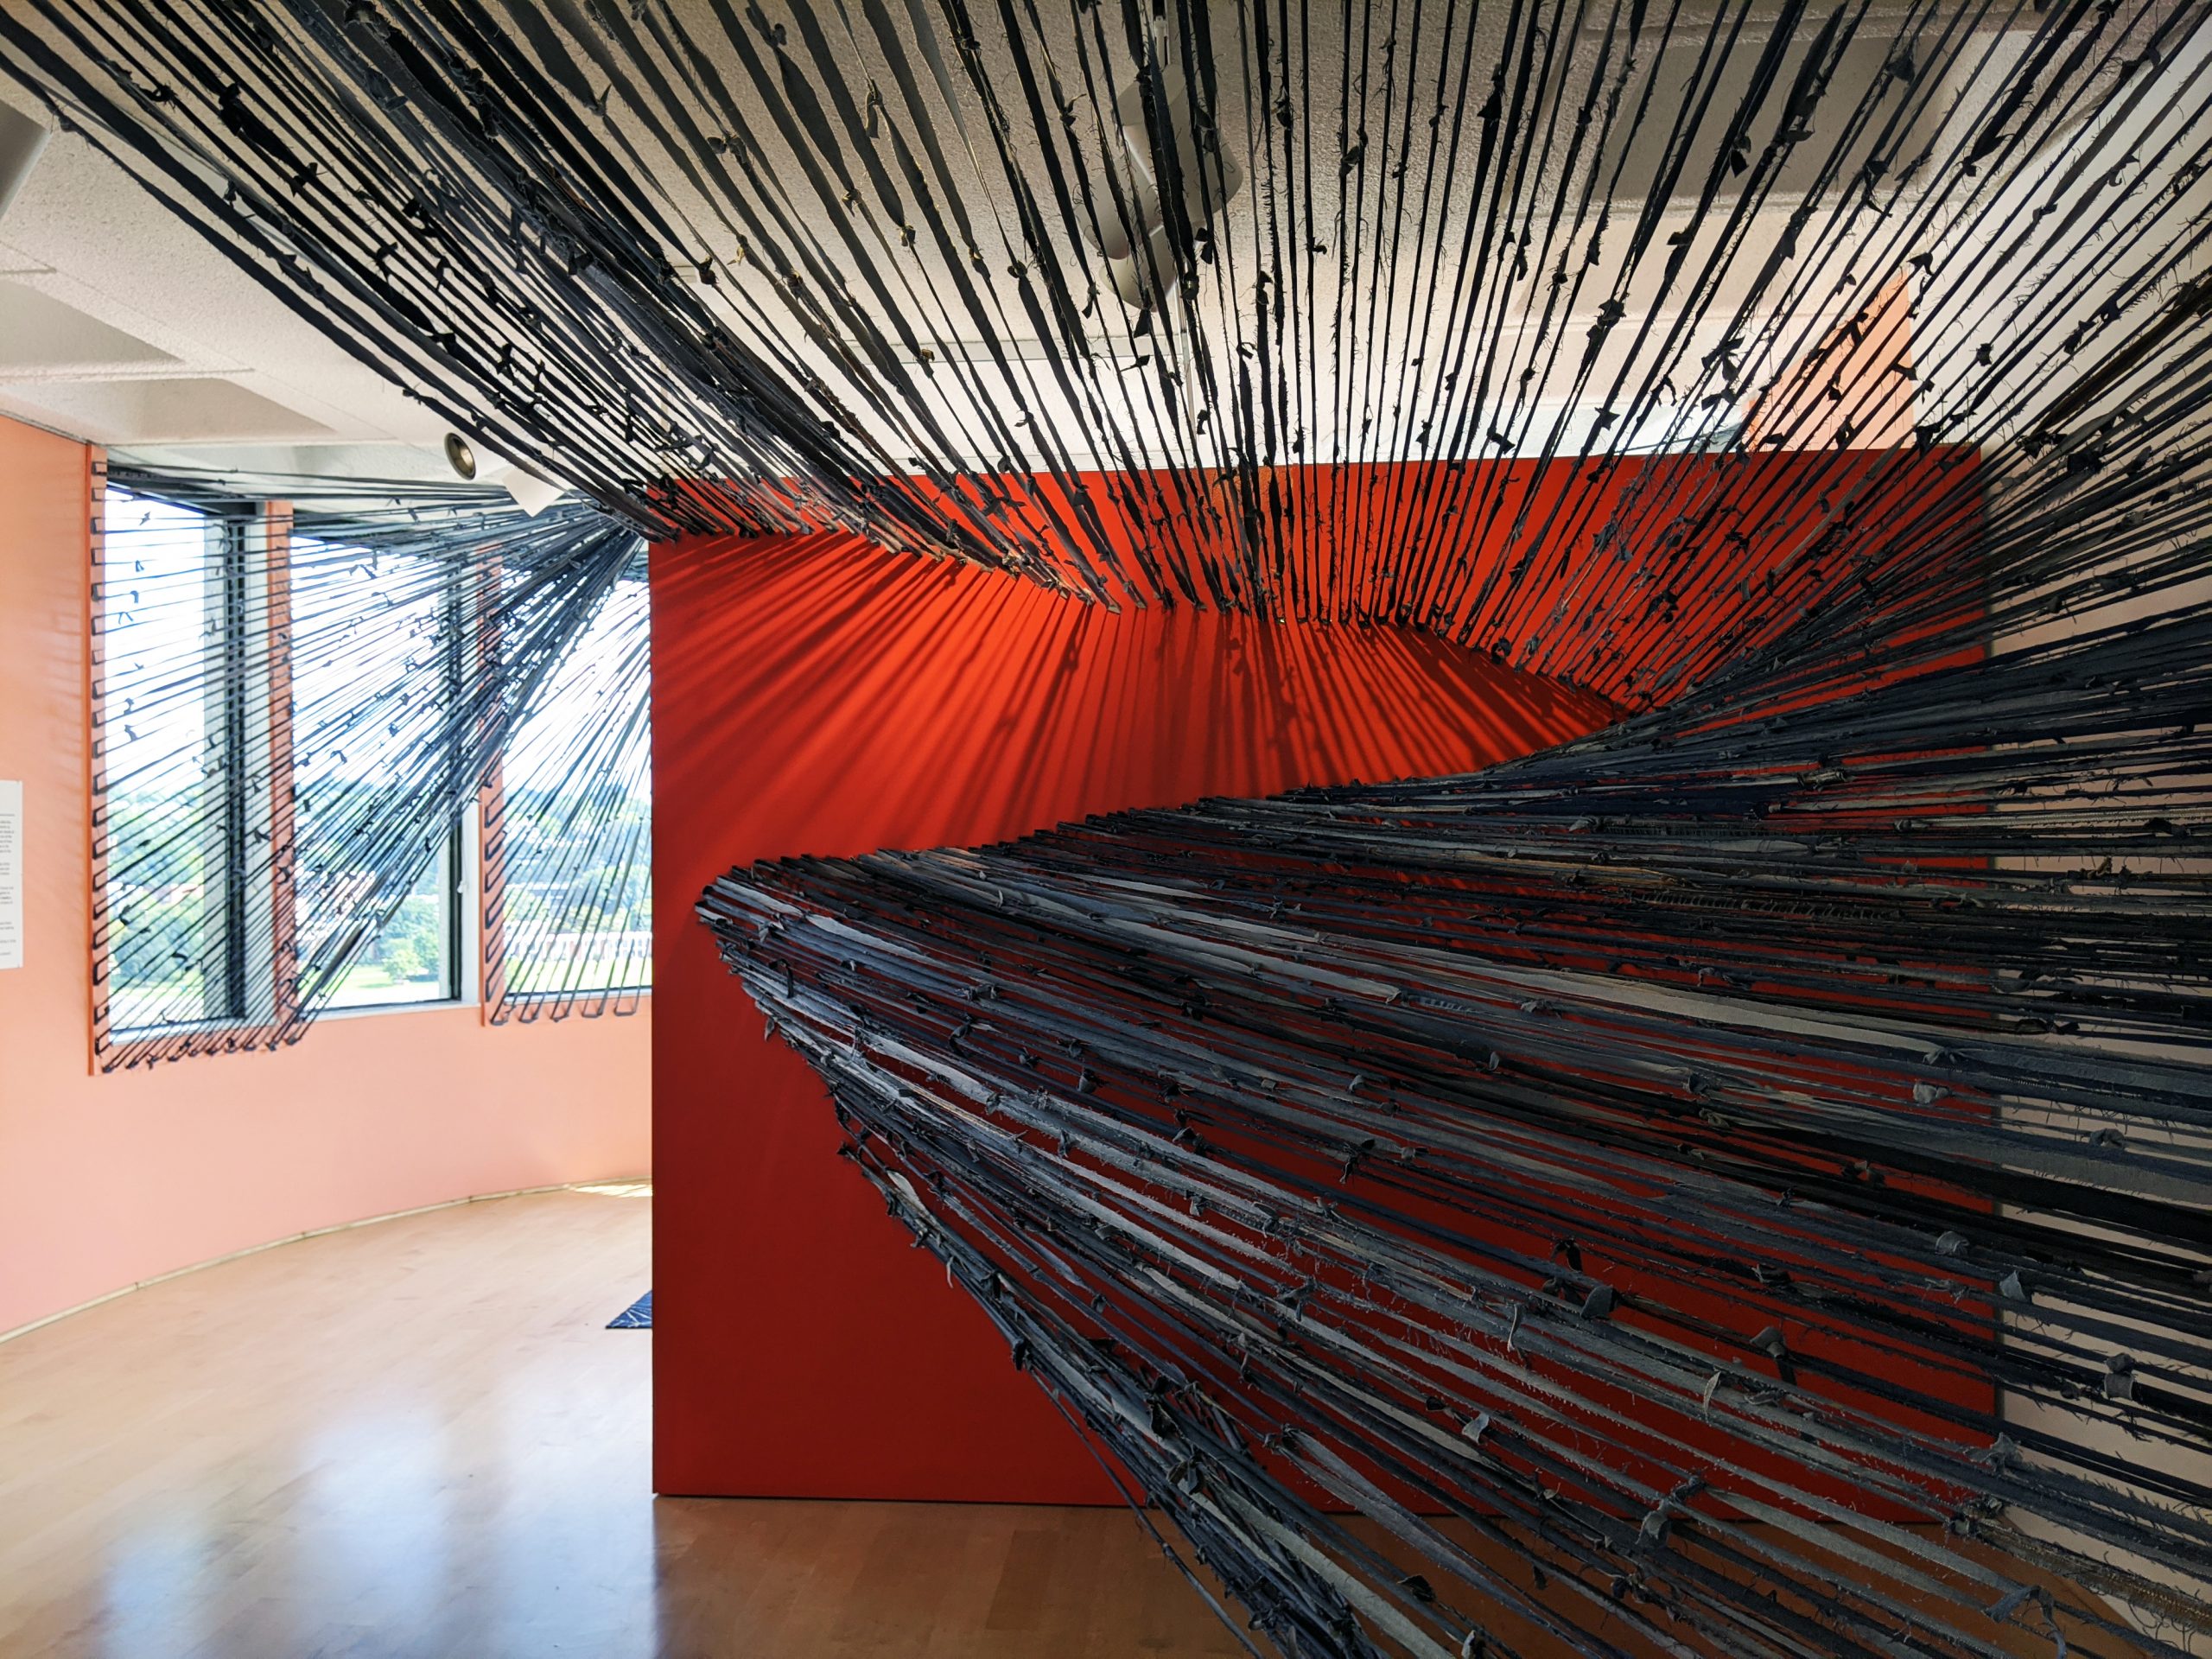 Strips of denim attached to two walls stretched across a room.